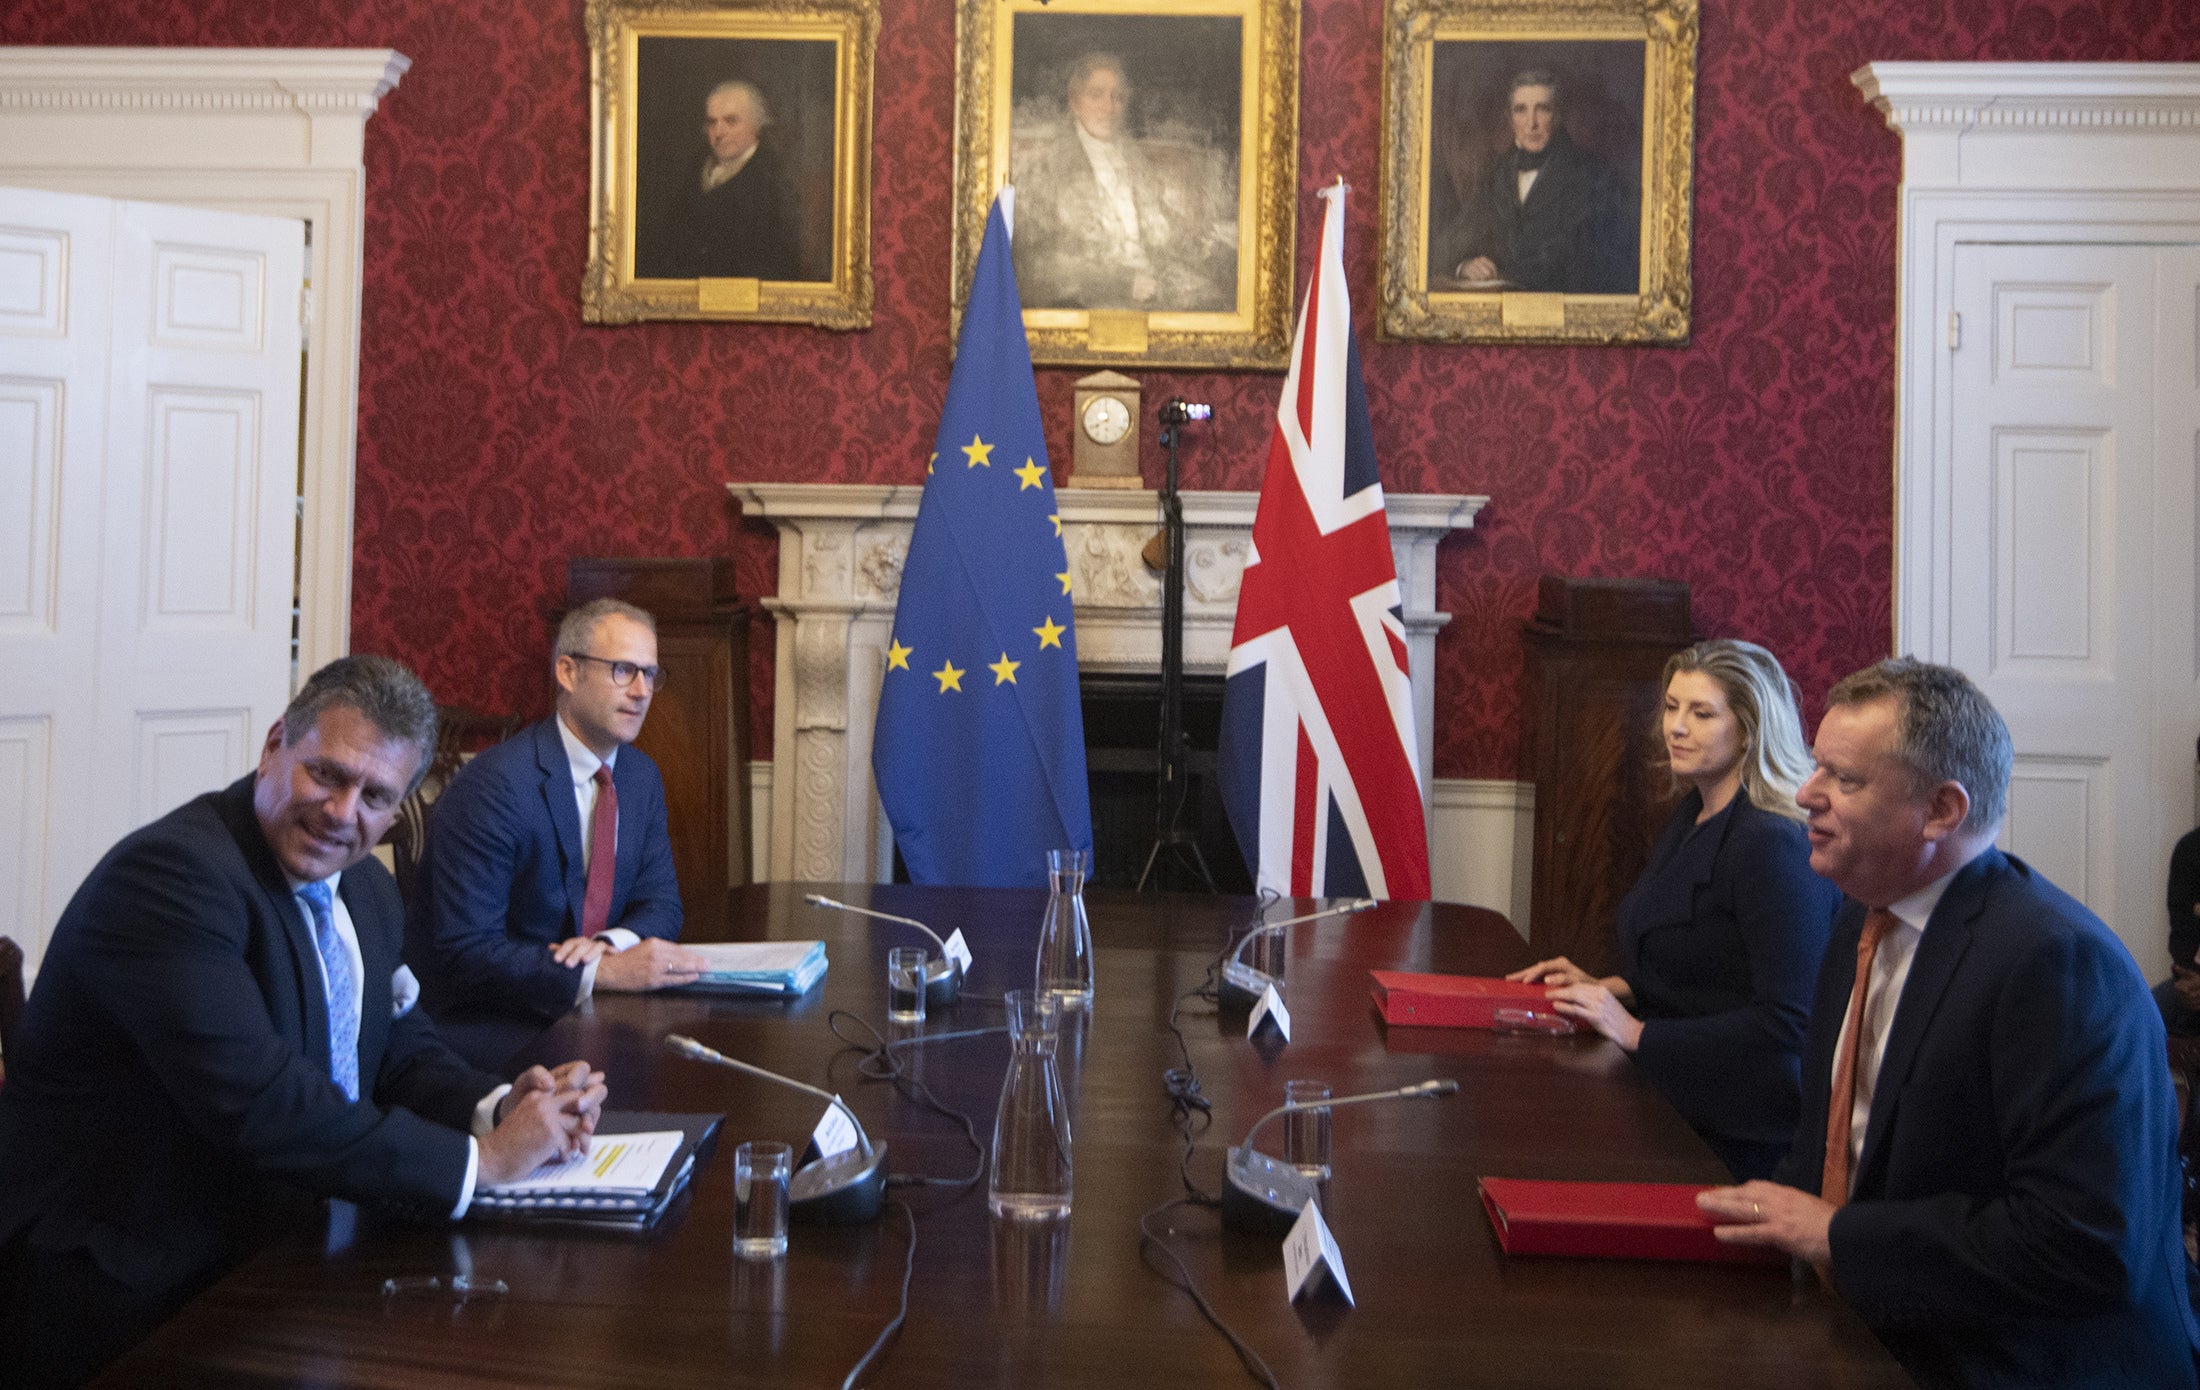 Brexit minister Lord Frost, flanked by Penny Mordaunt, sitting opposite Maros Sefcovic and Richard Szostak